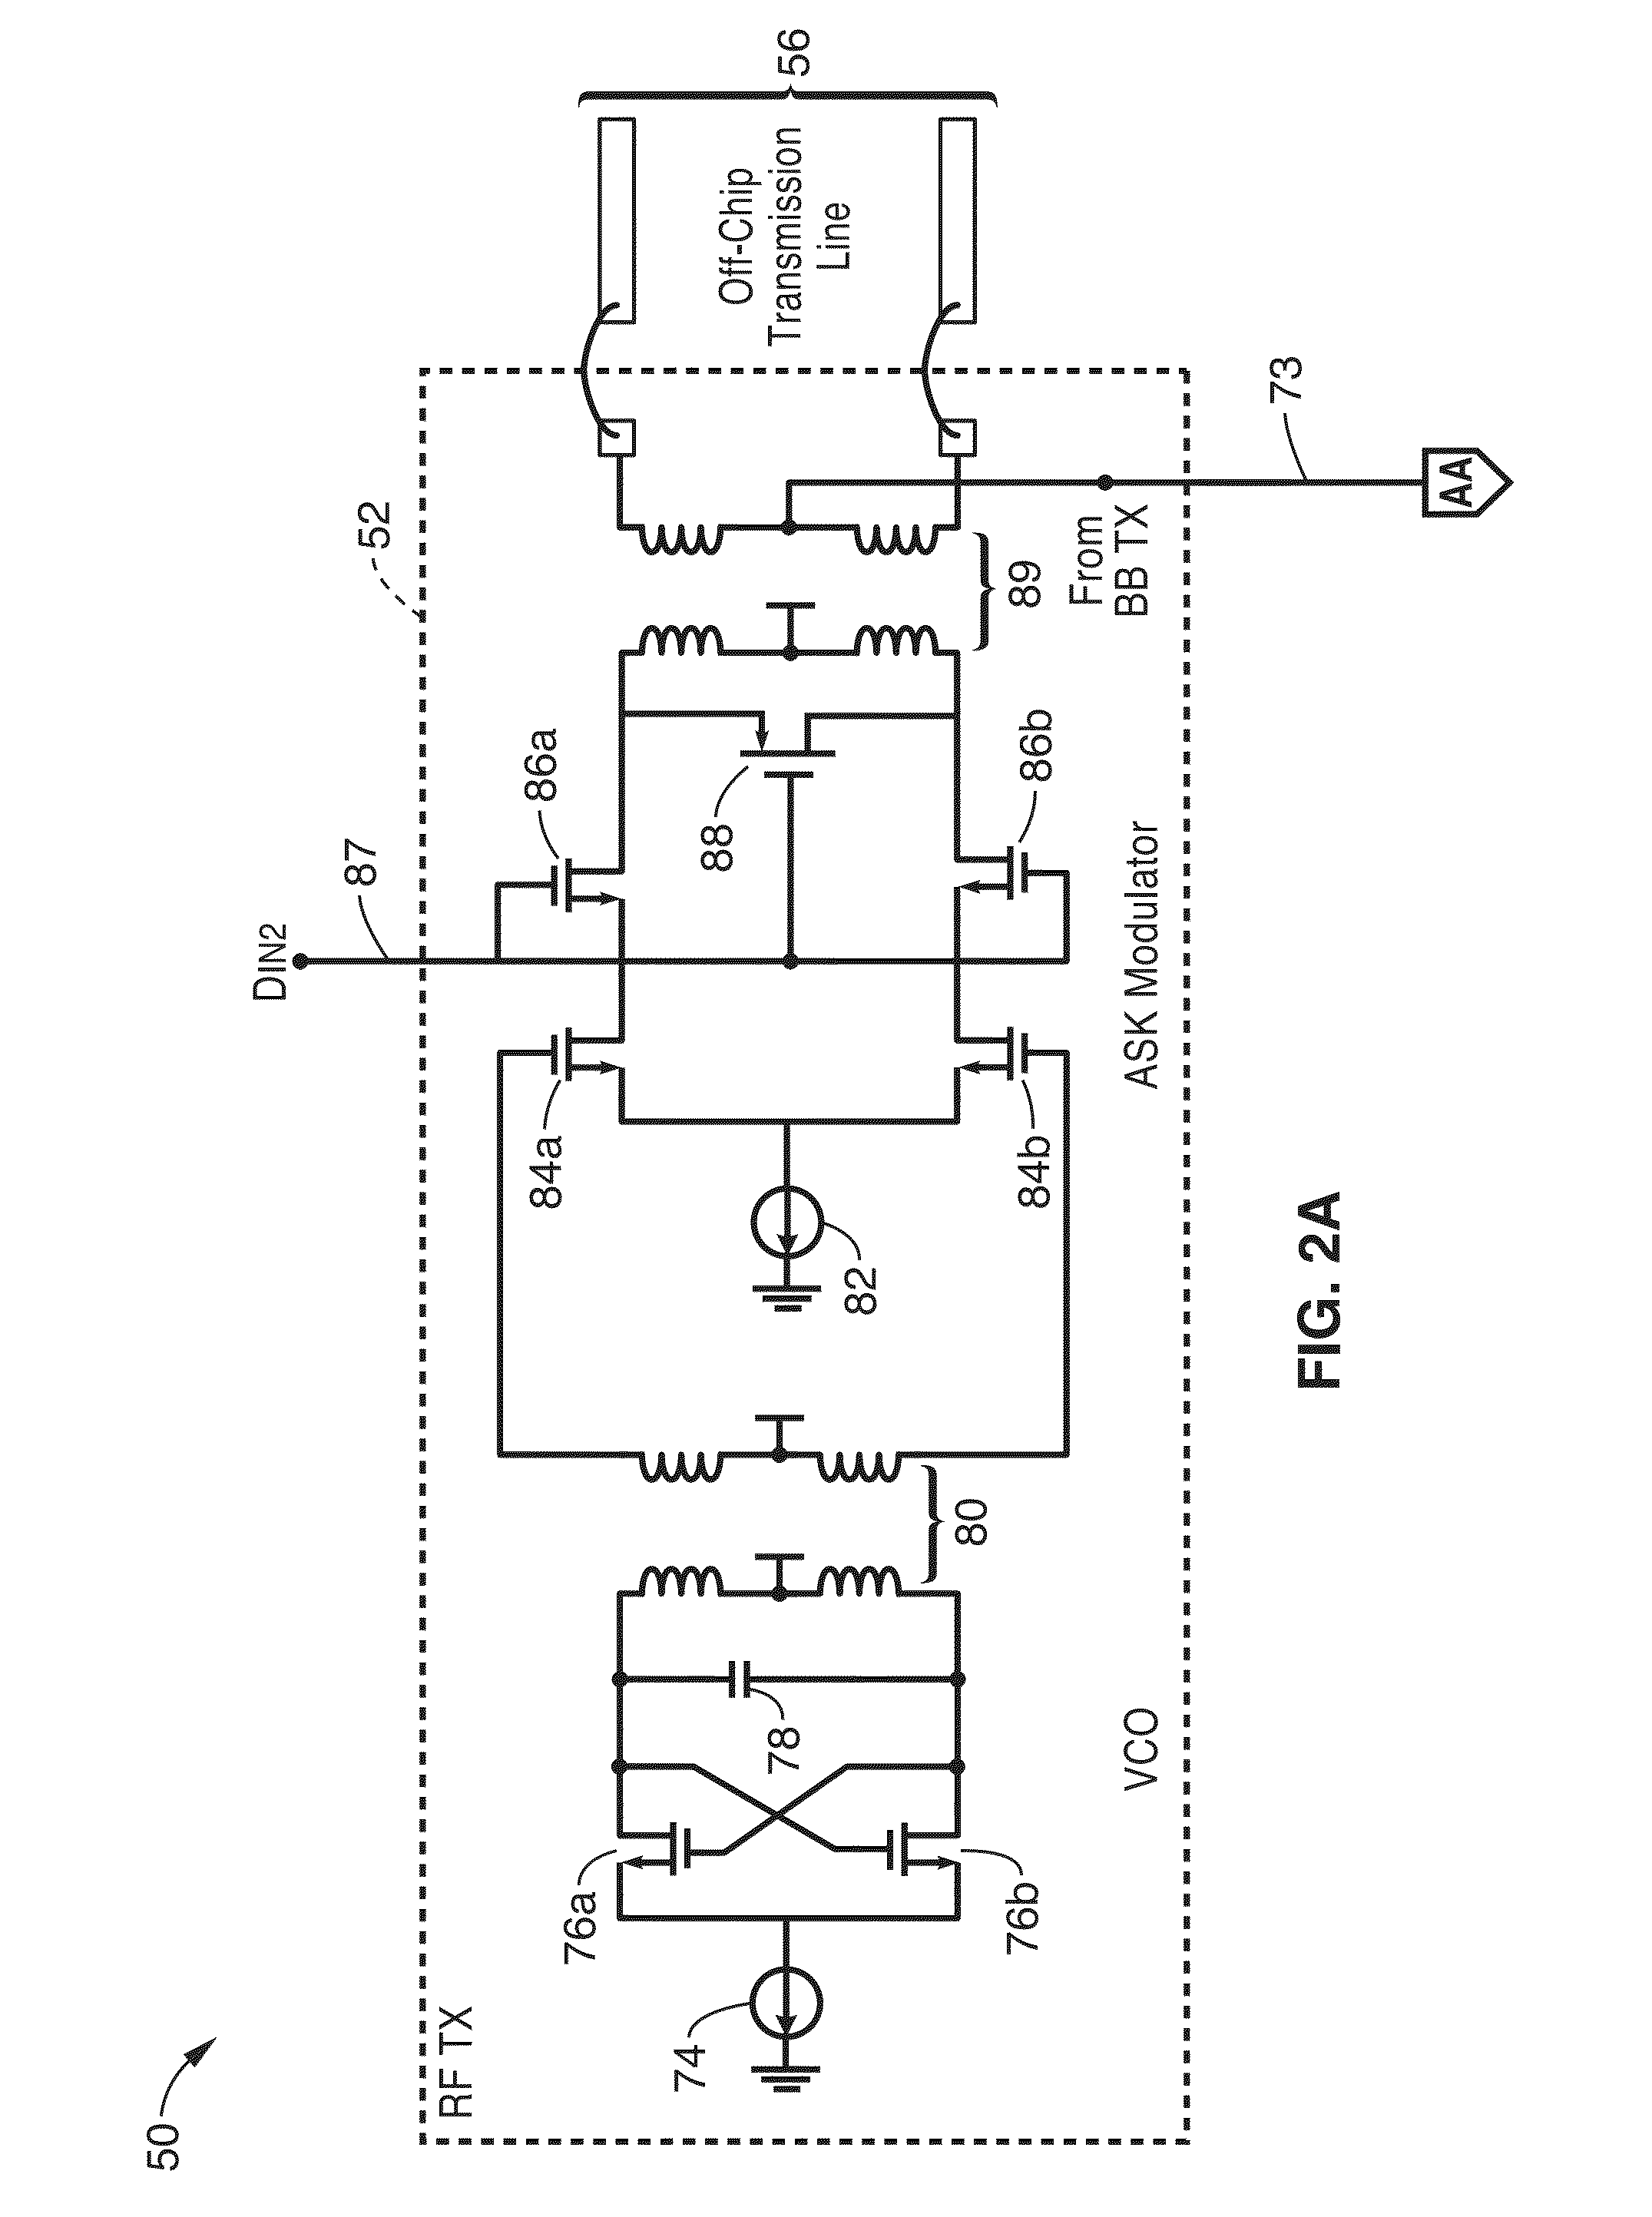 Multi-band interconnect for inter-chip and intra-chip communications